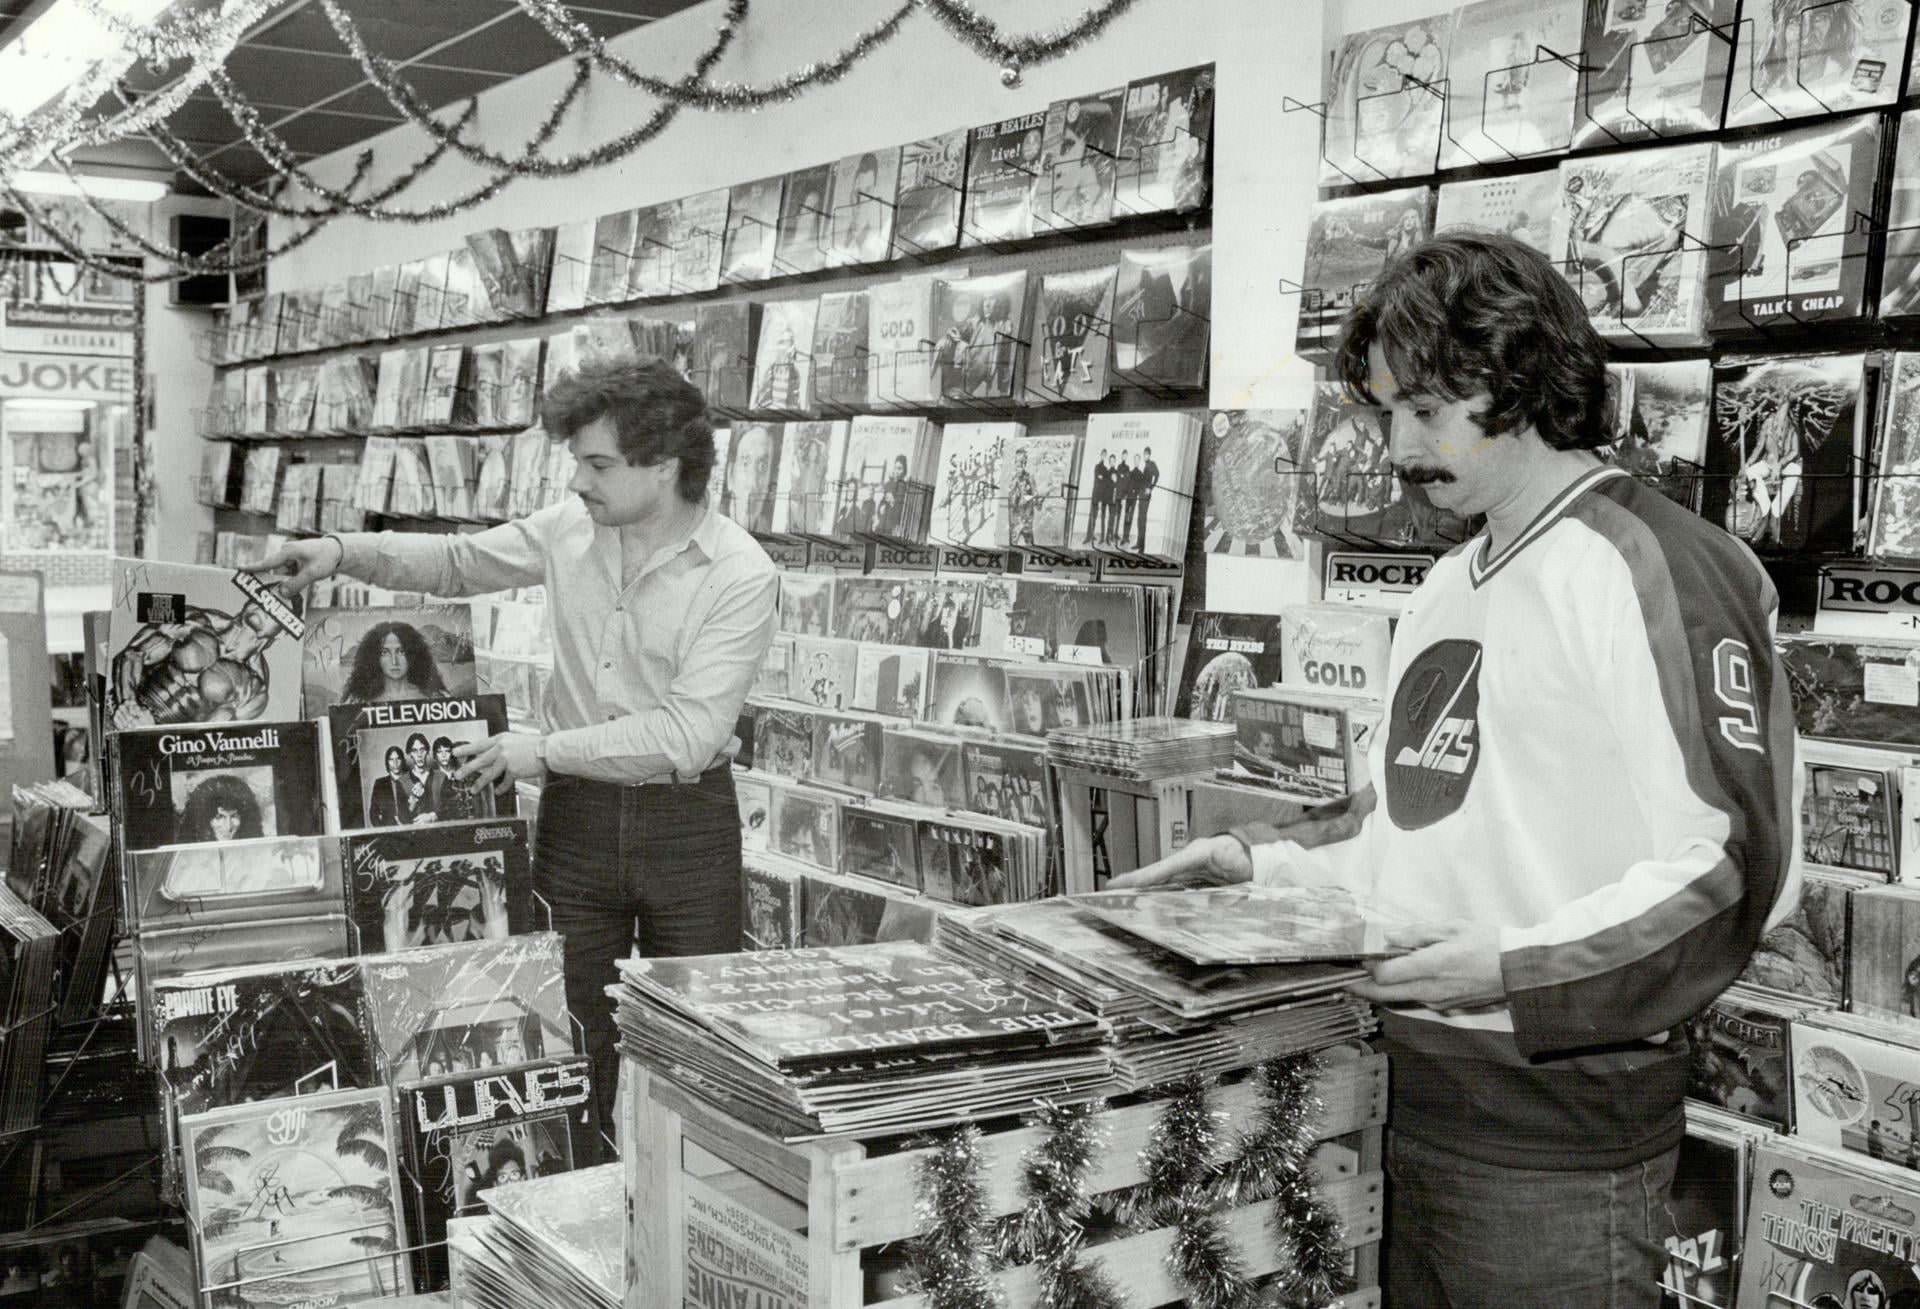 Record store on Yonge Street in 1979